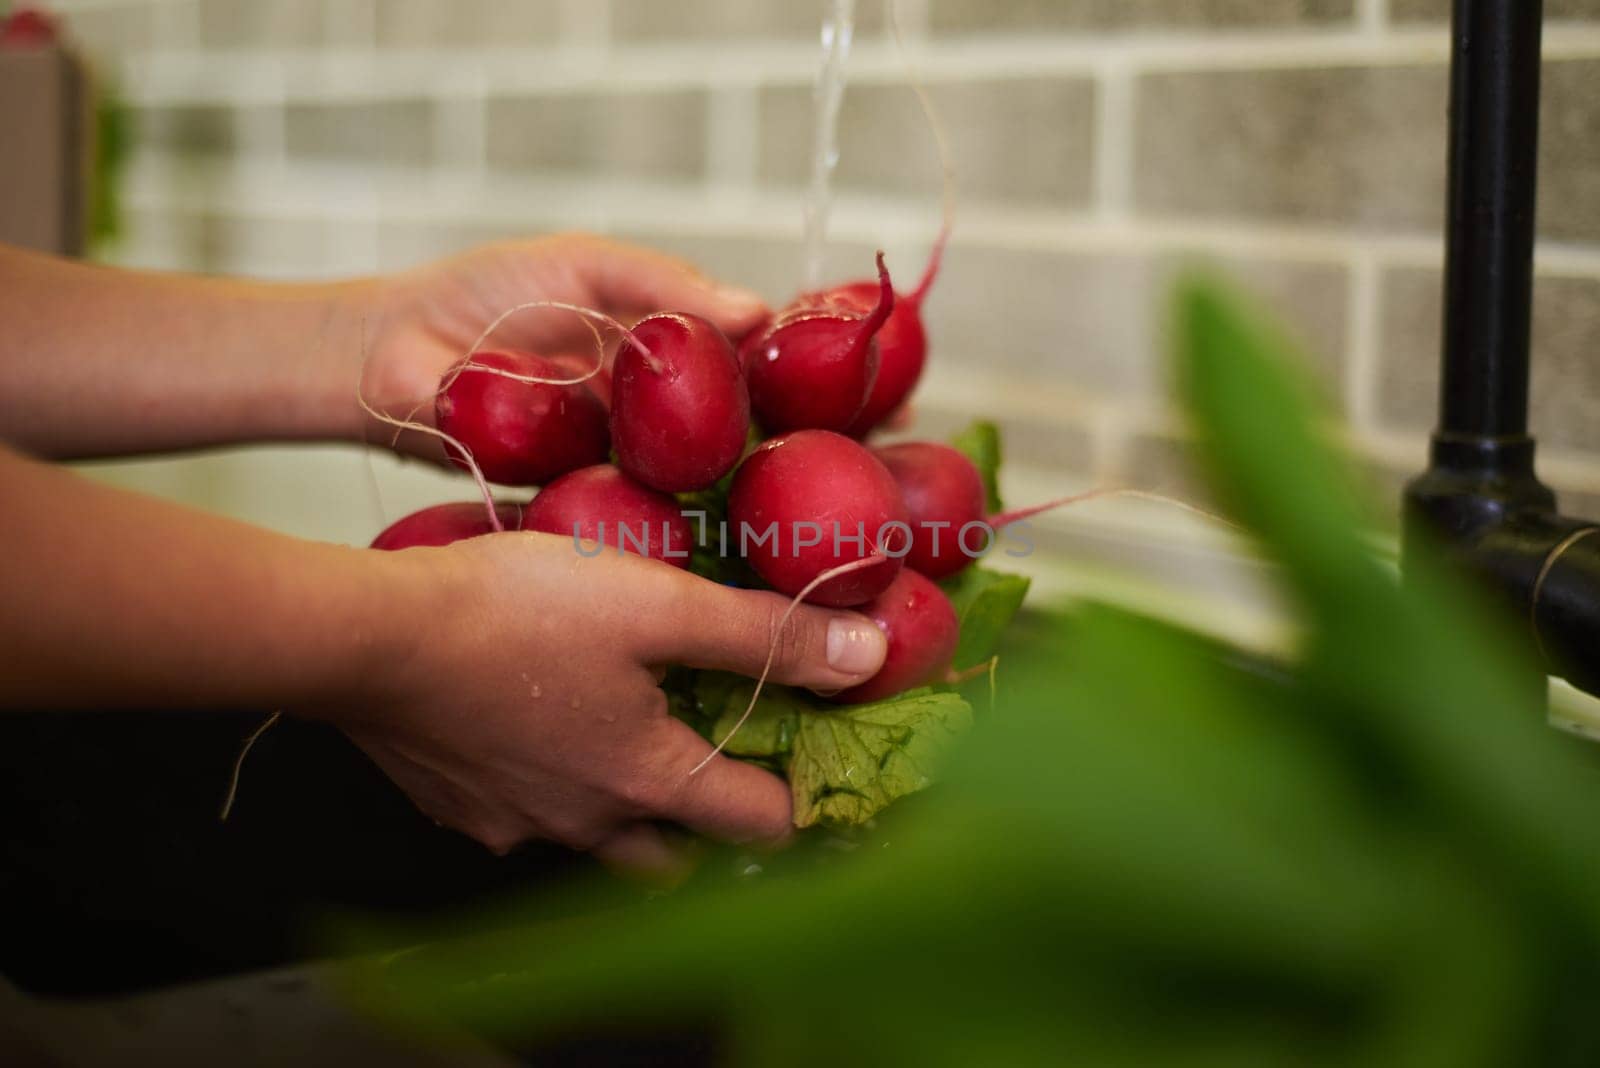 Healthy food, proper nutrition, slimming and dieting concept. Sustainable lifestyle. Organic food. Close-up view of hands washing fresh radish in the sink under flowing water. Side view